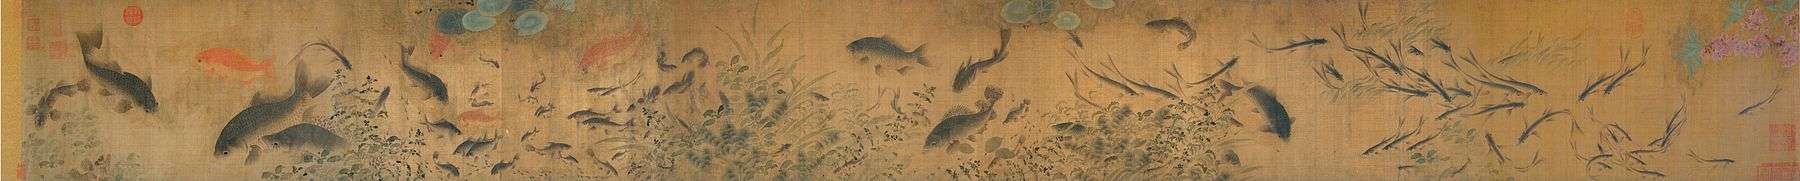 A hand scroll showing carp and other types of fish swimming